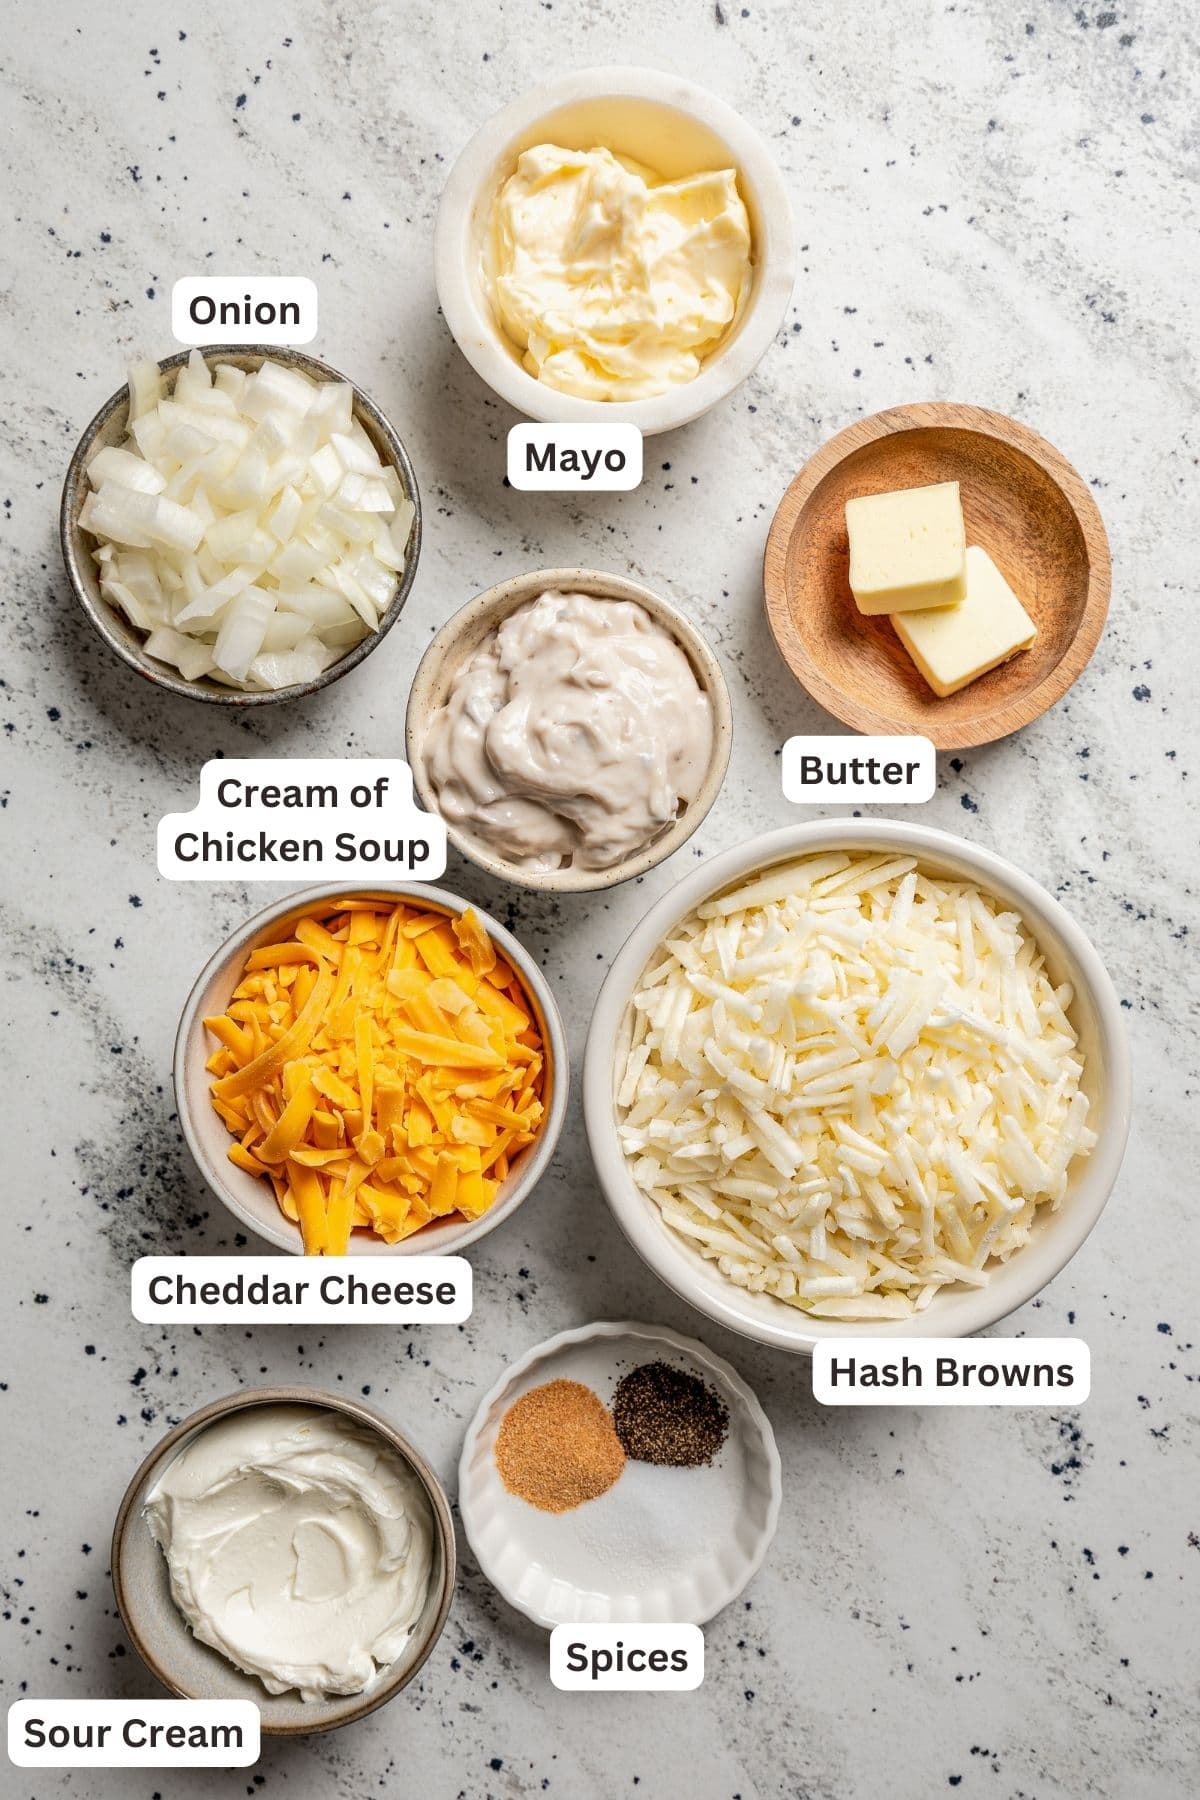 Labeled ingredients for cheesy hash browns.